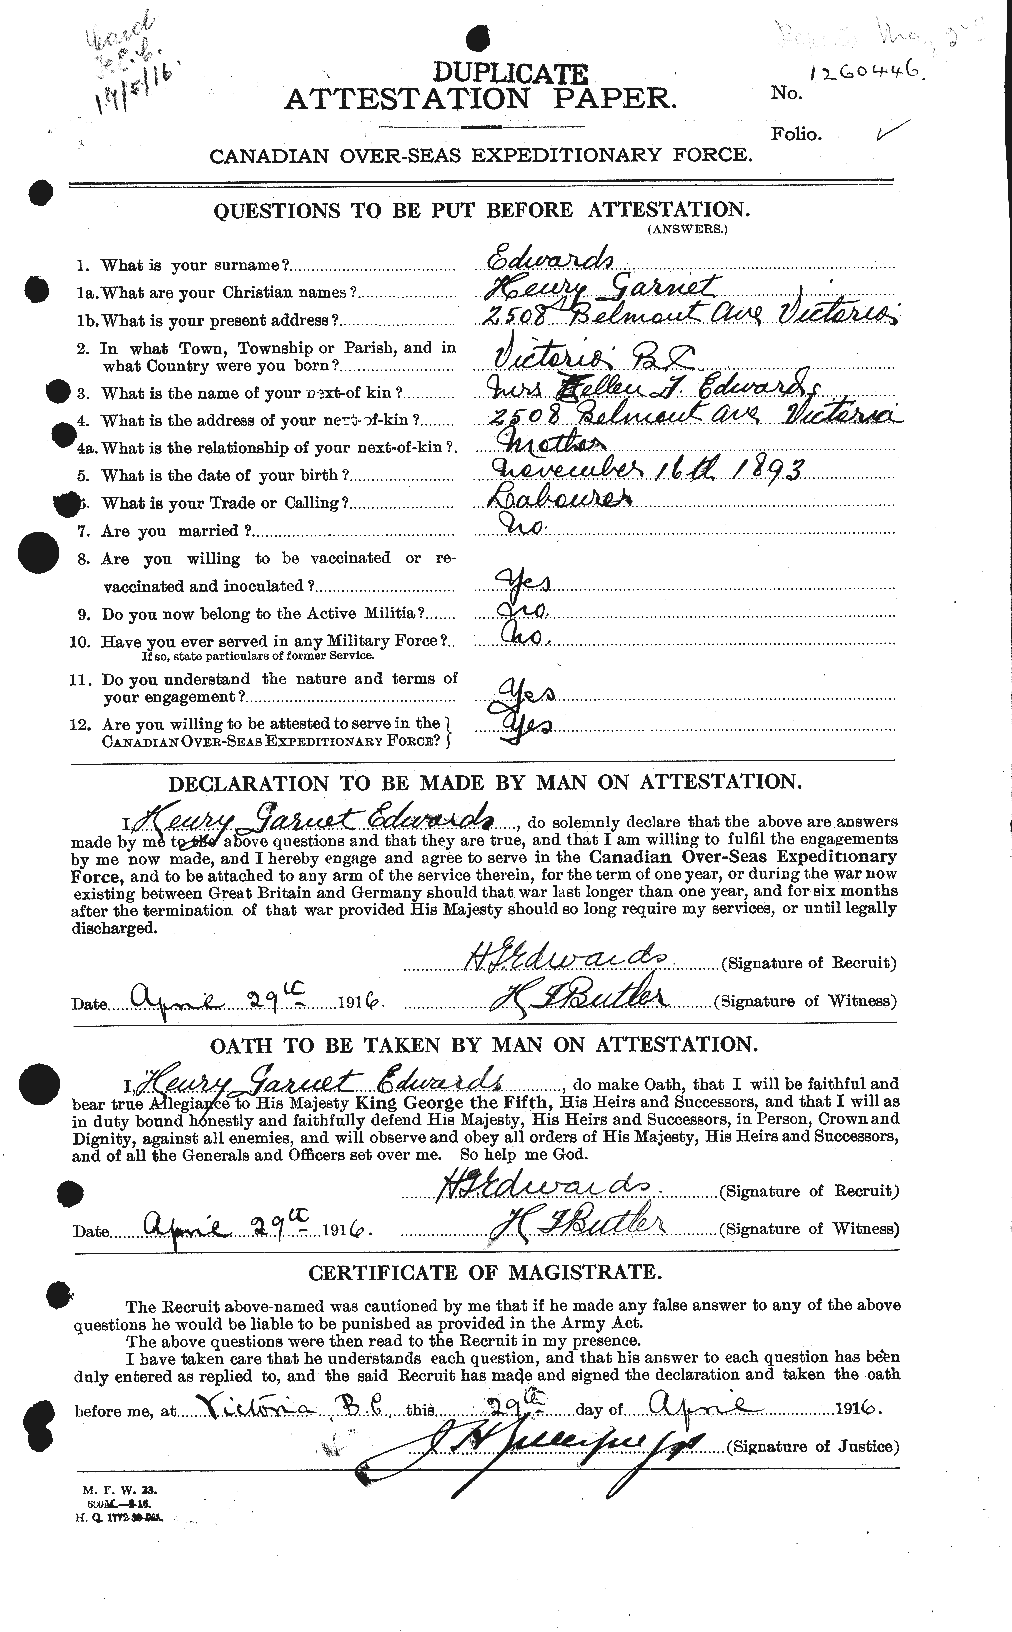 Personnel Records of the First World War - CEF 309760a